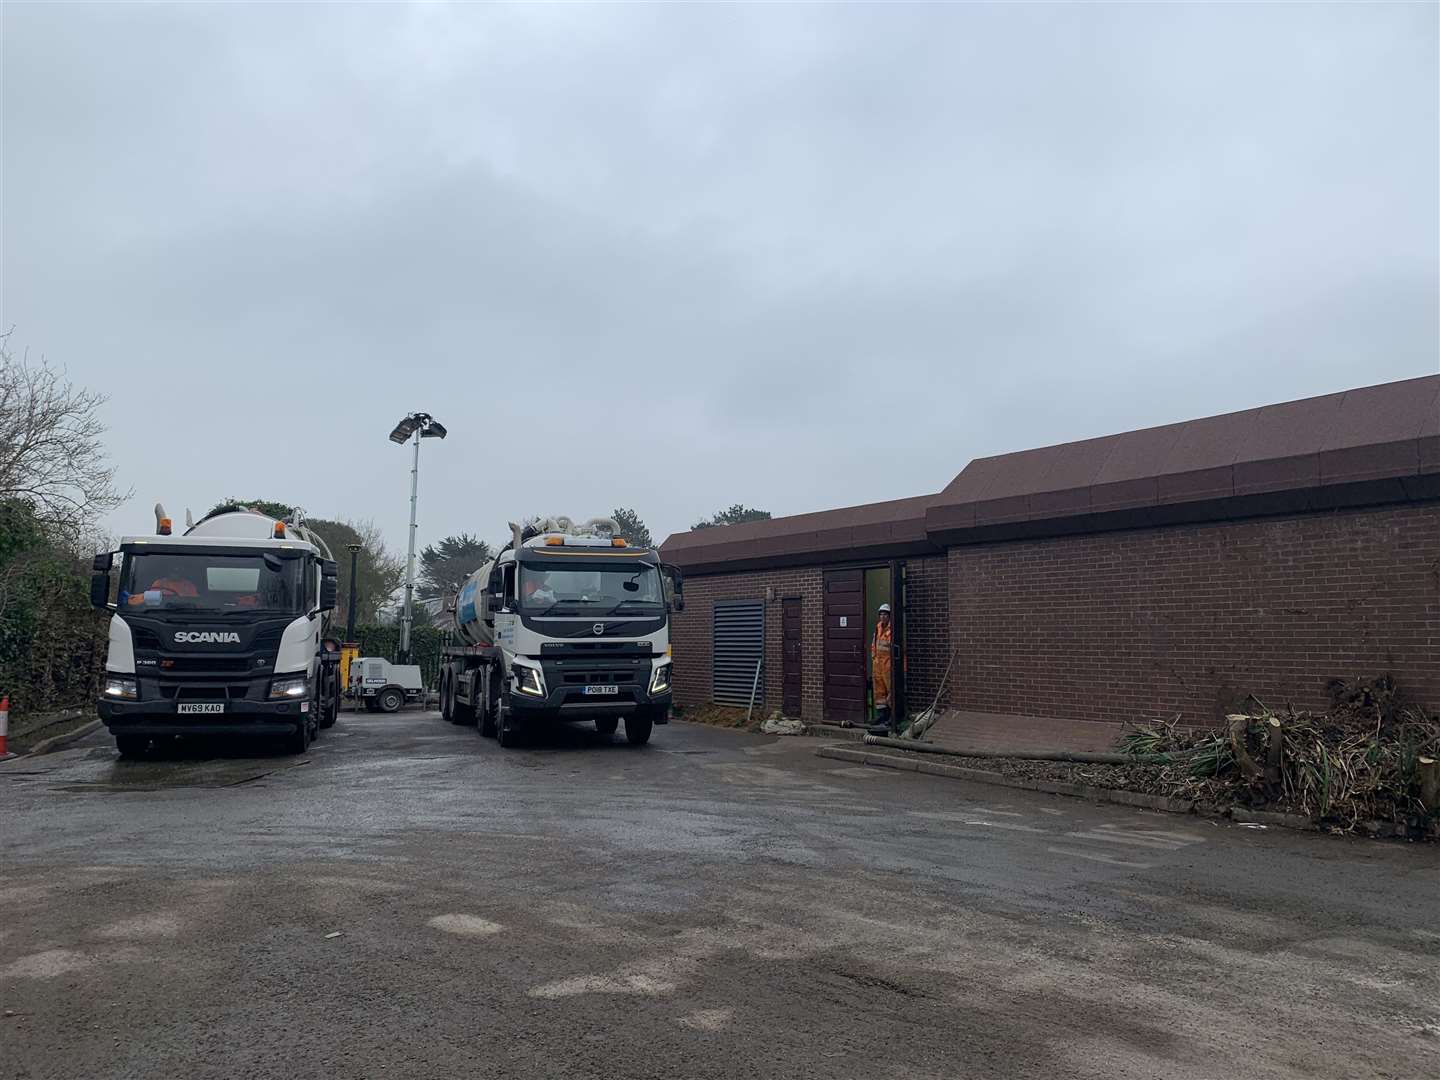 17 lorries are being used for the 24-hour operation in Sandwich